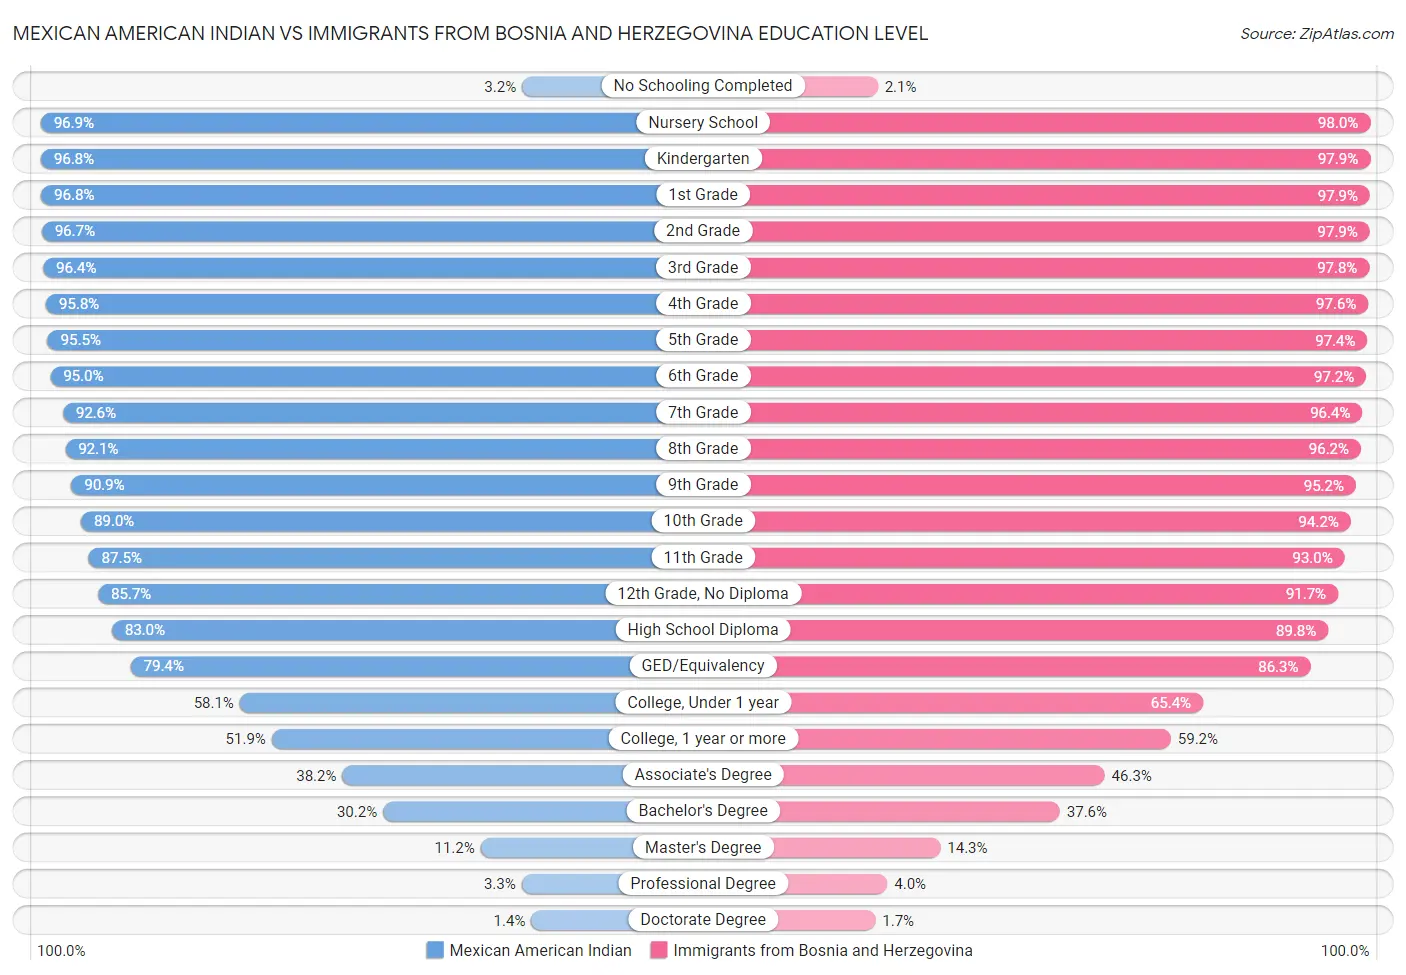 Mexican American Indian vs Immigrants from Bosnia and Herzegovina Education Level